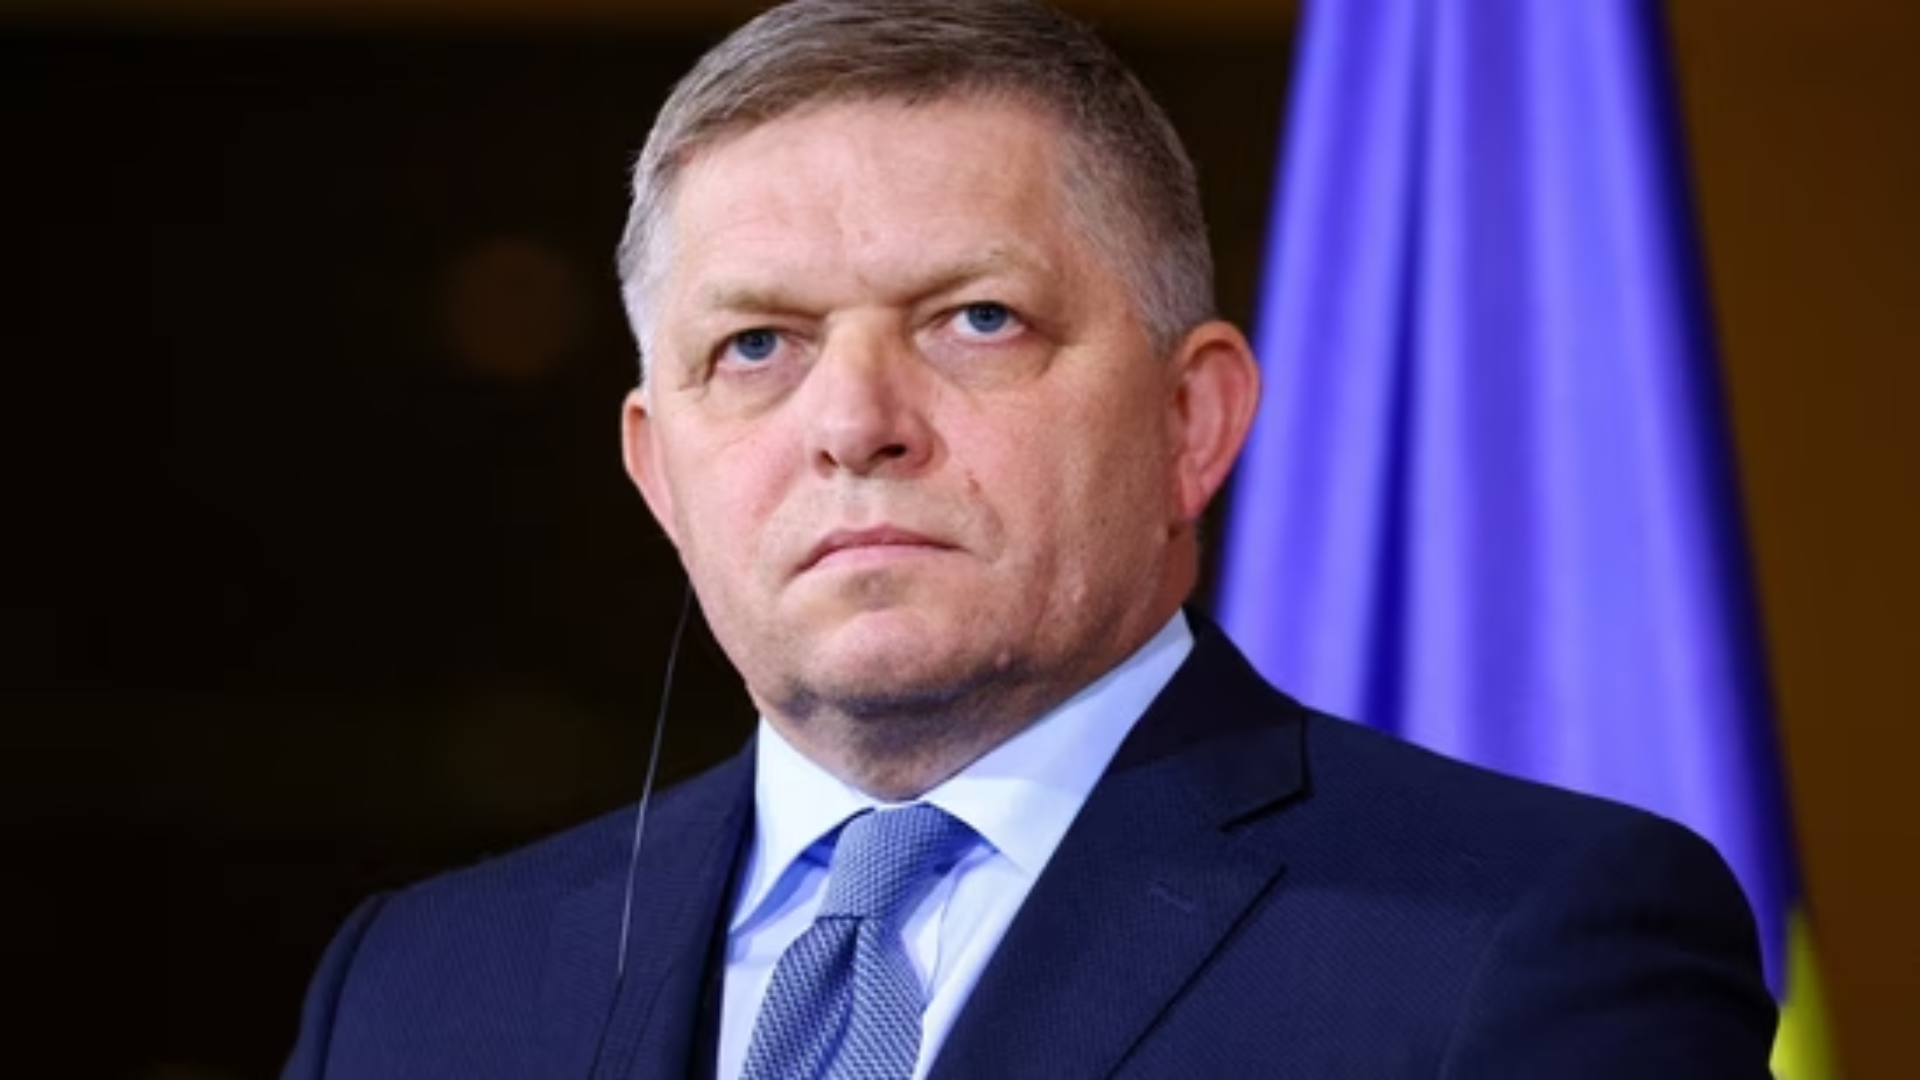 Slovak PM Robert Fico Expected to Recover After Assassination Attempt, Confirms Deputy PM Tomas Taraba